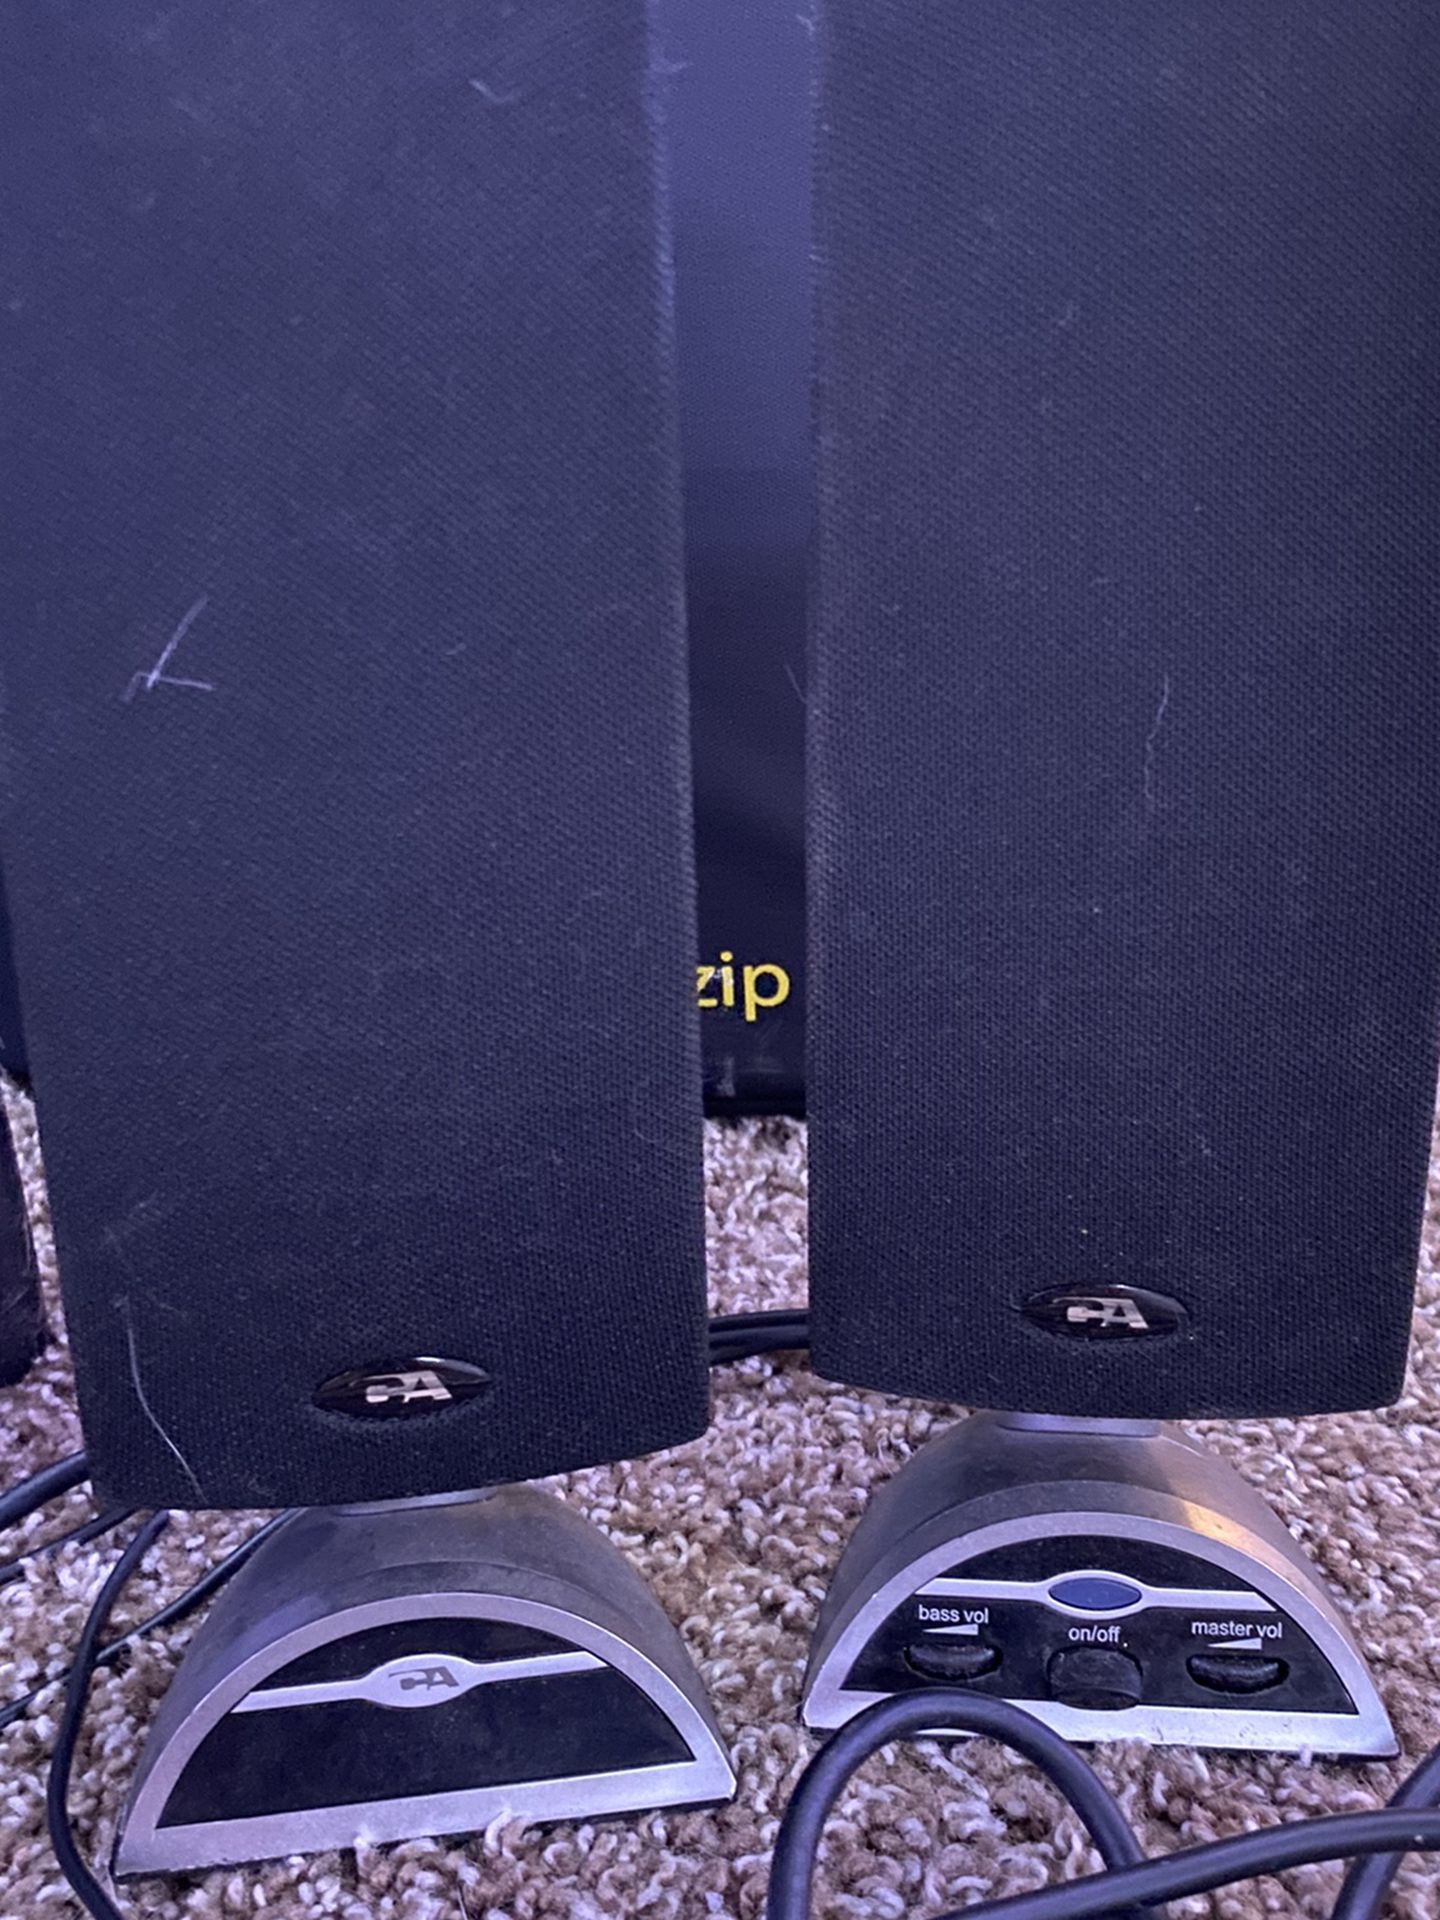 Speakers with A Sub